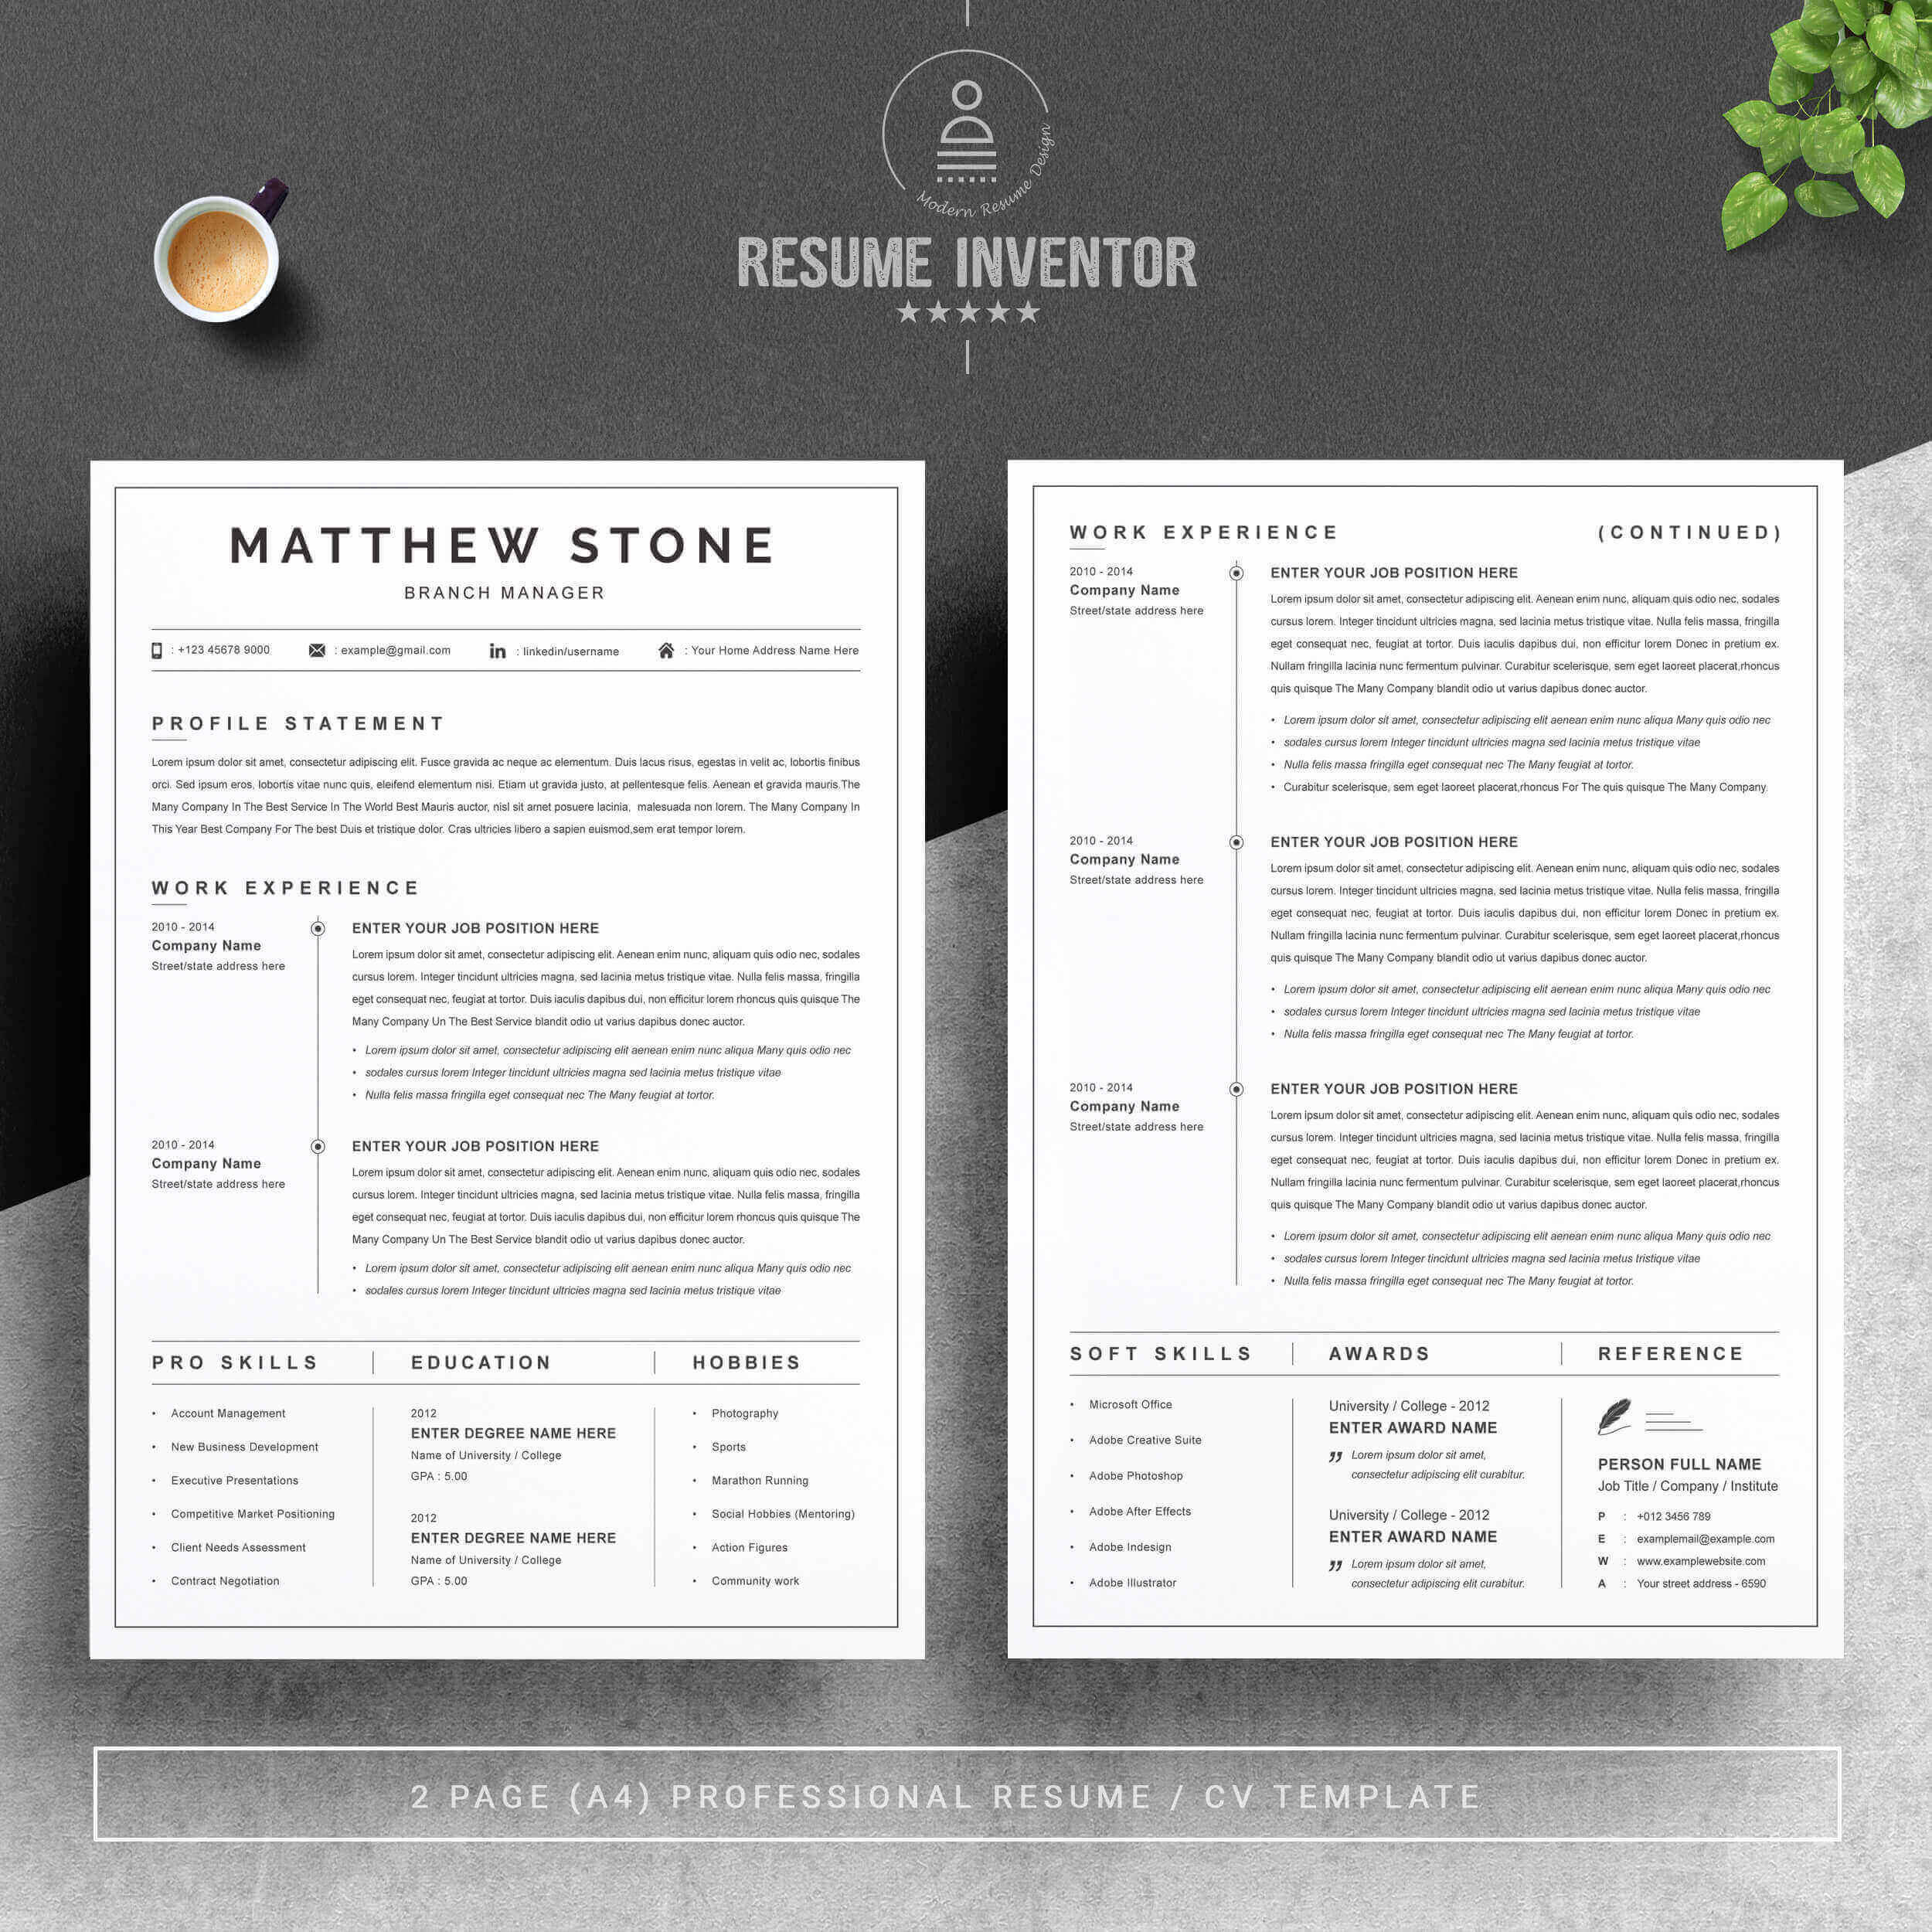 Branch Manager Clean Resume Template | Professional Resume Template preview image.